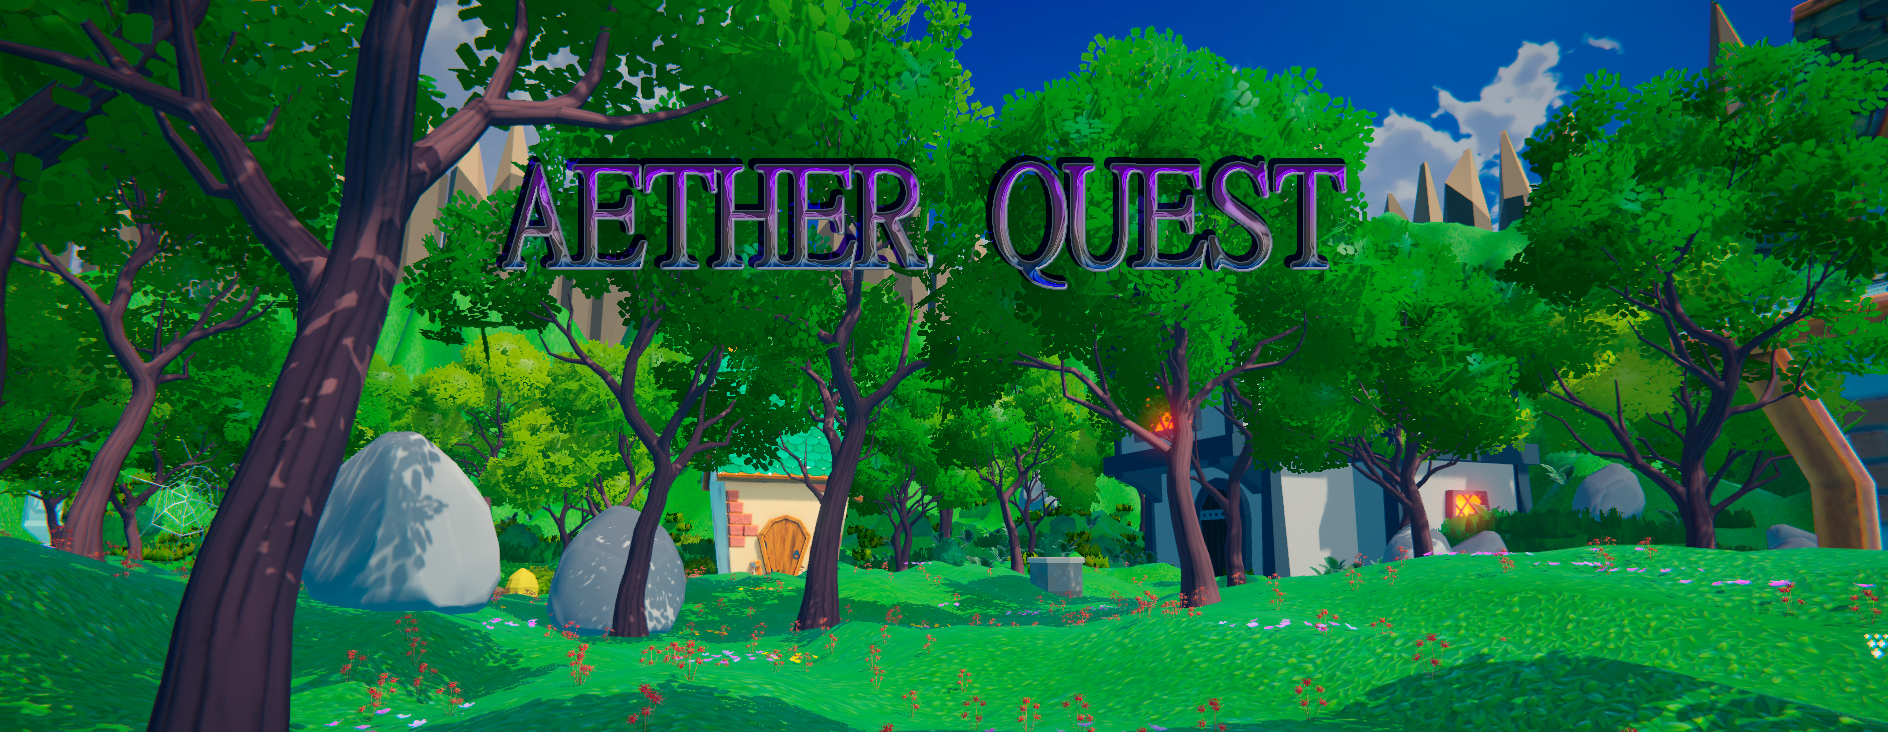 Aether Quest